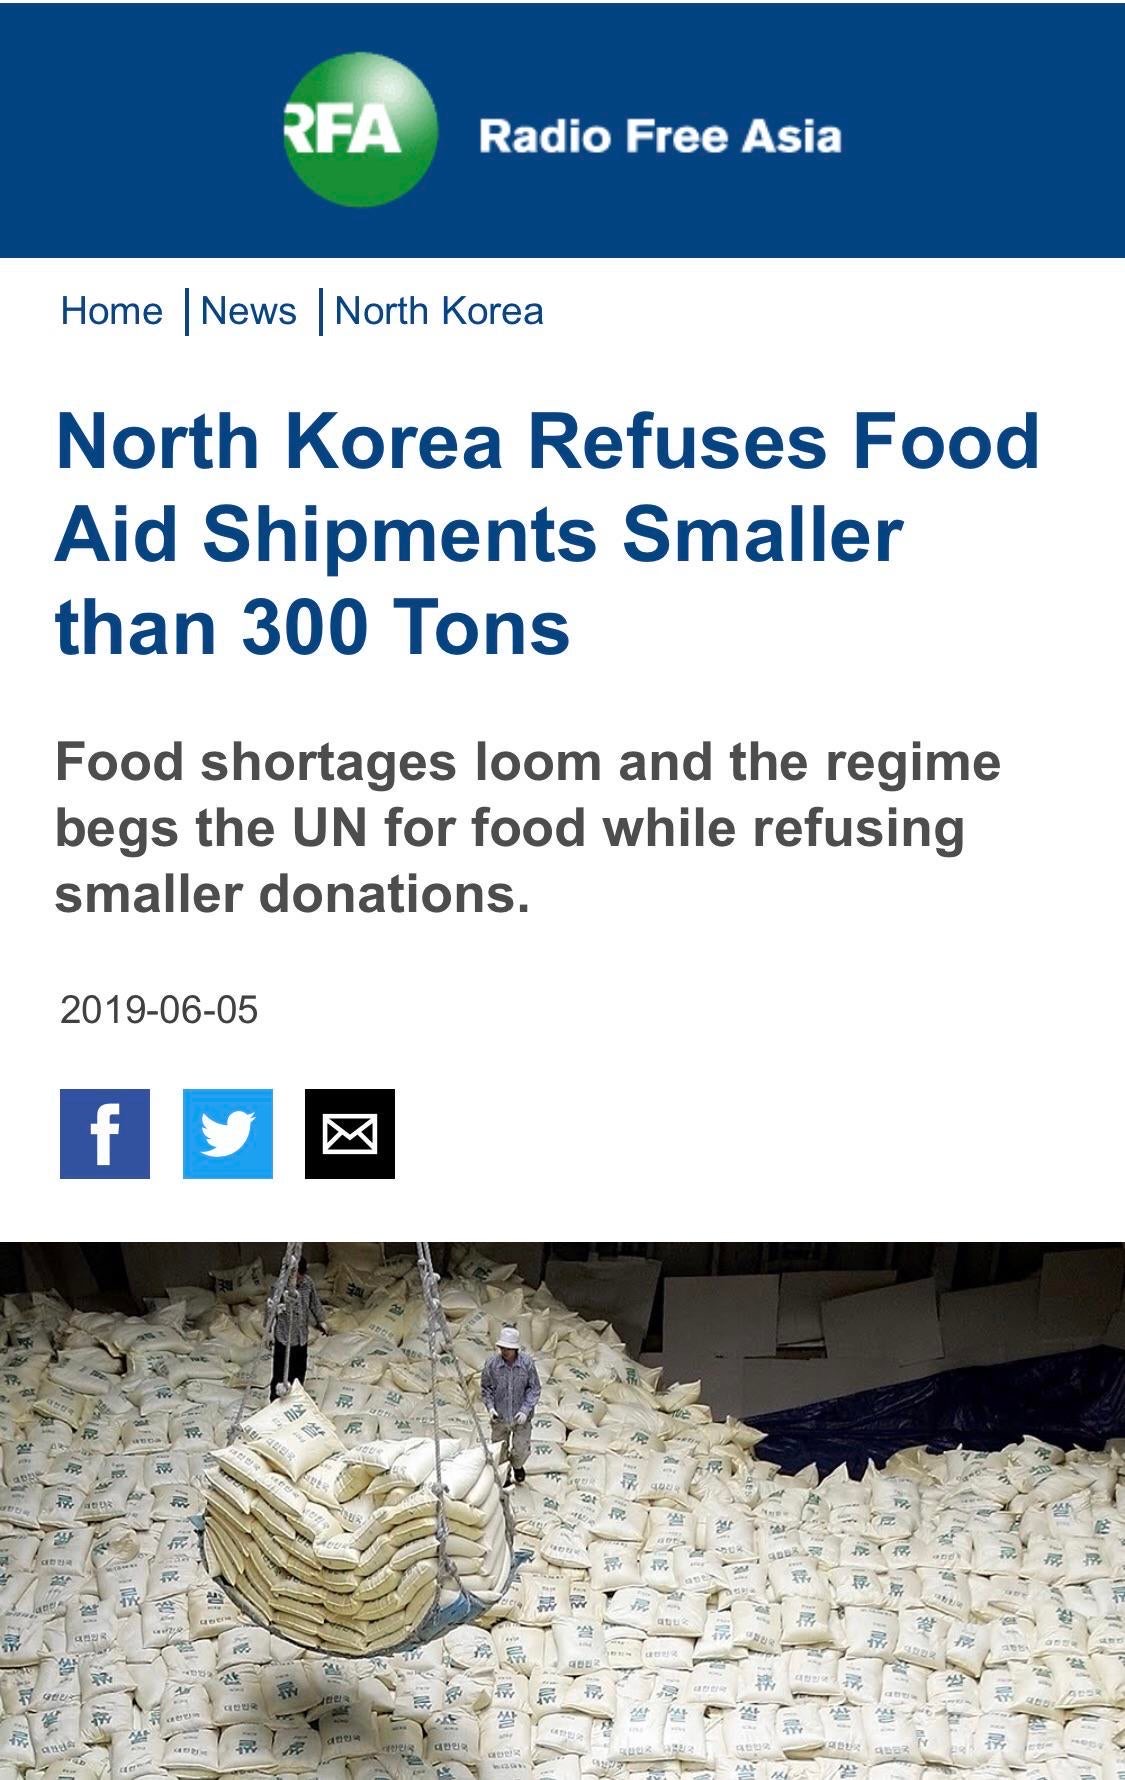 super entitled people - water resources - Rfa Radio Free Asia Home | News | North Korea North Korea Refuses Food Aid Shipments Smaller than 300 Tons Food shortages loom and the regime begs the Un for food while refusing smaller donations. 14 13 Es Un Ne 2